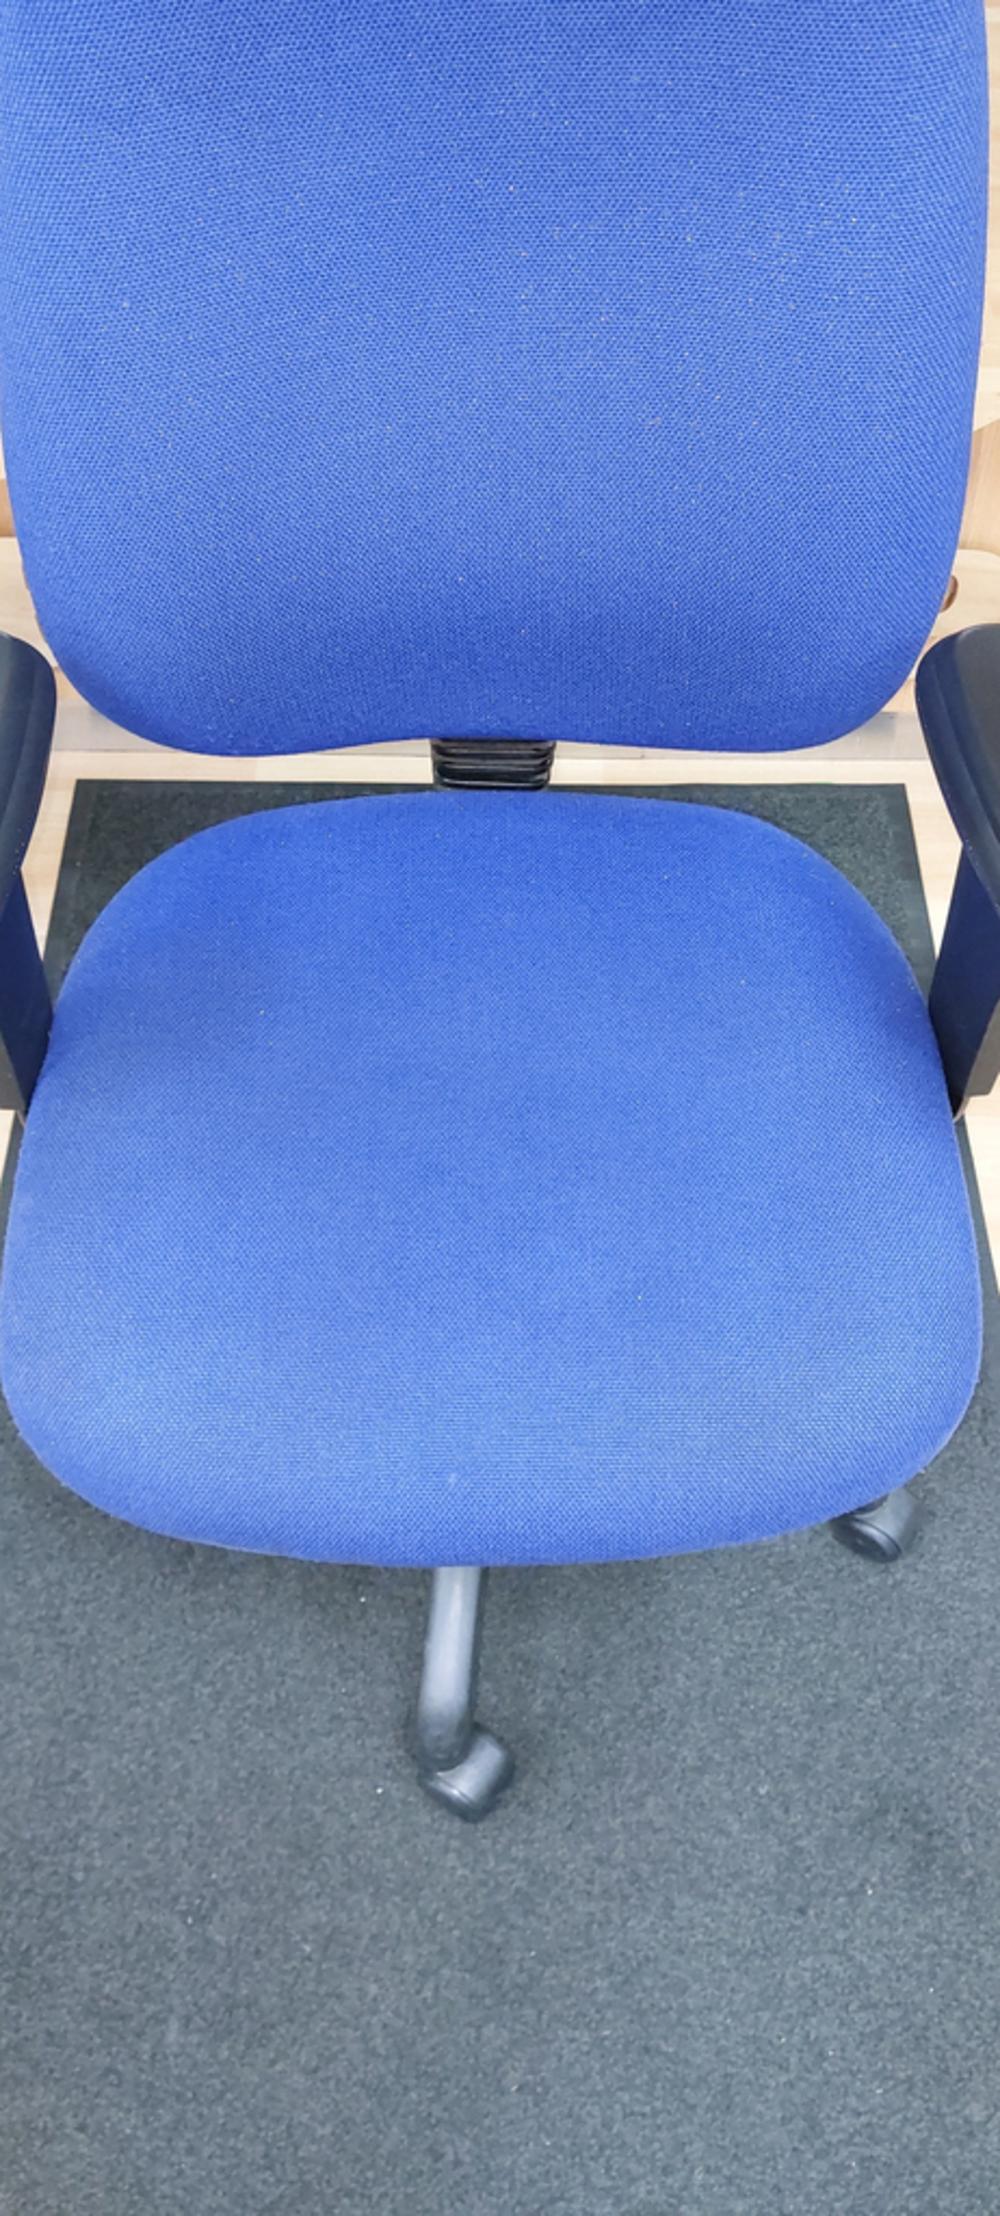 Blue High Back Operator Chair With Adjustable Arms